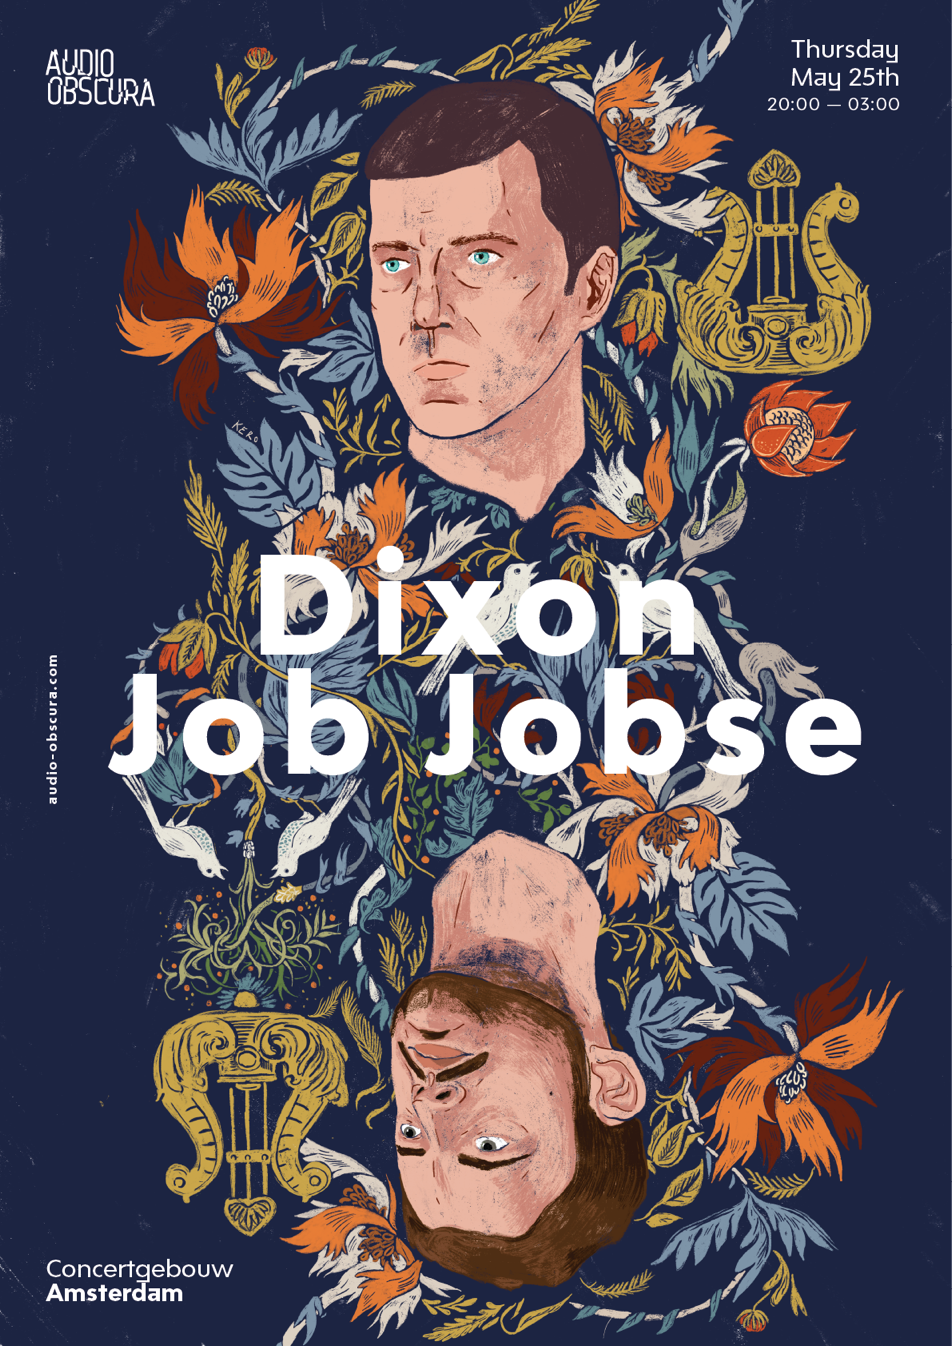 Dixon and Job Jobse to play seven-hour back-to-back set in Amsterdam image